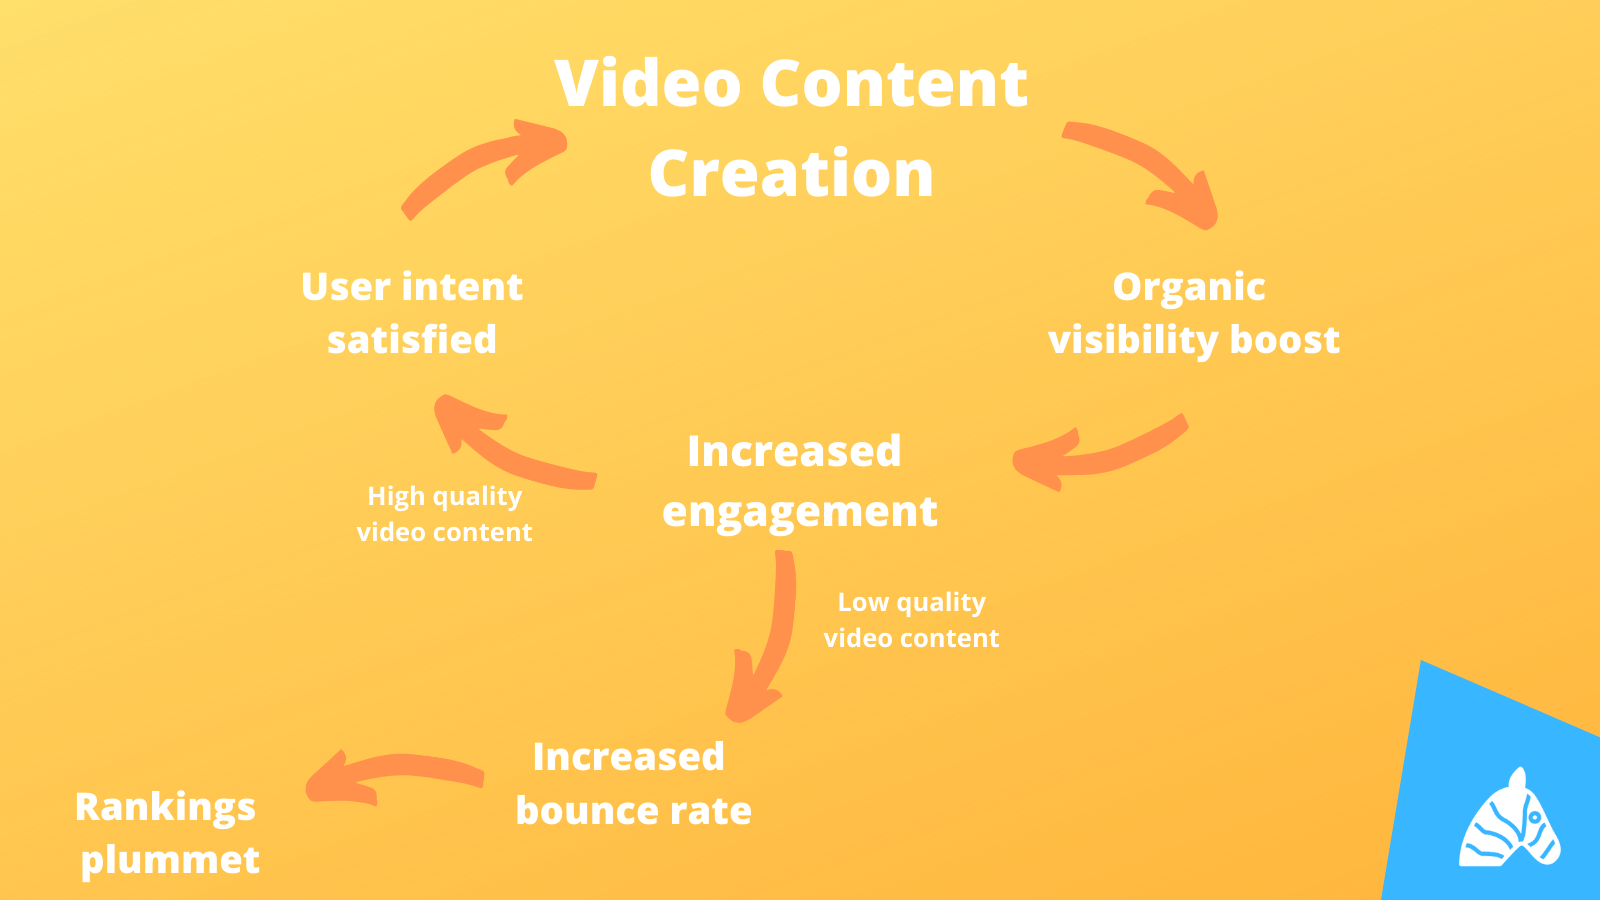 video content creation process explained